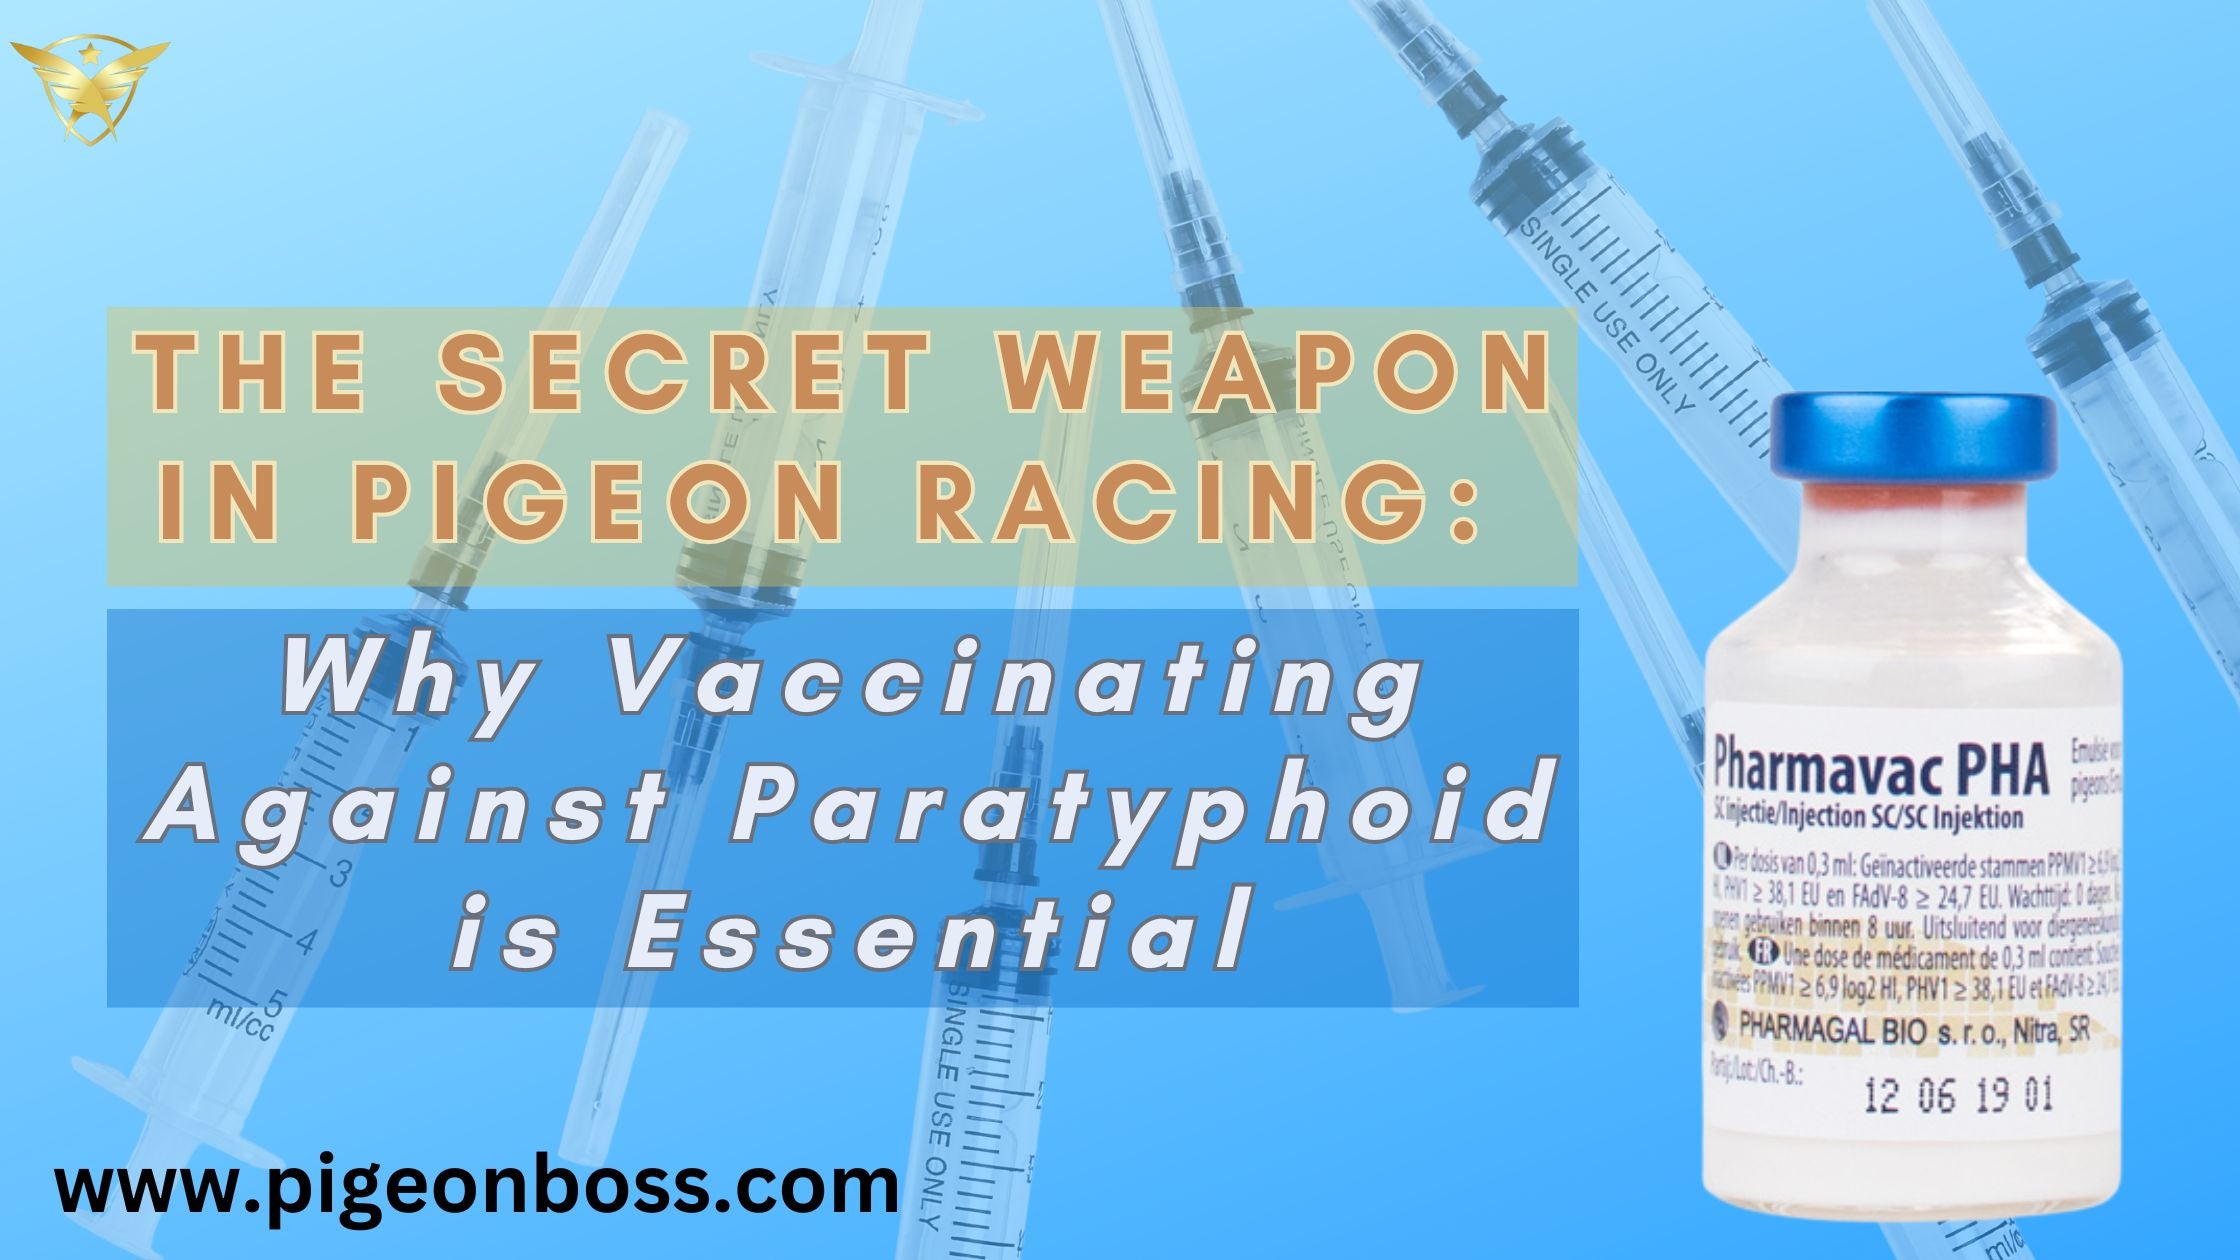 The Secret Weapon in Pigeon Racing: Why Vaccinating Against Paratyphoid is Essential